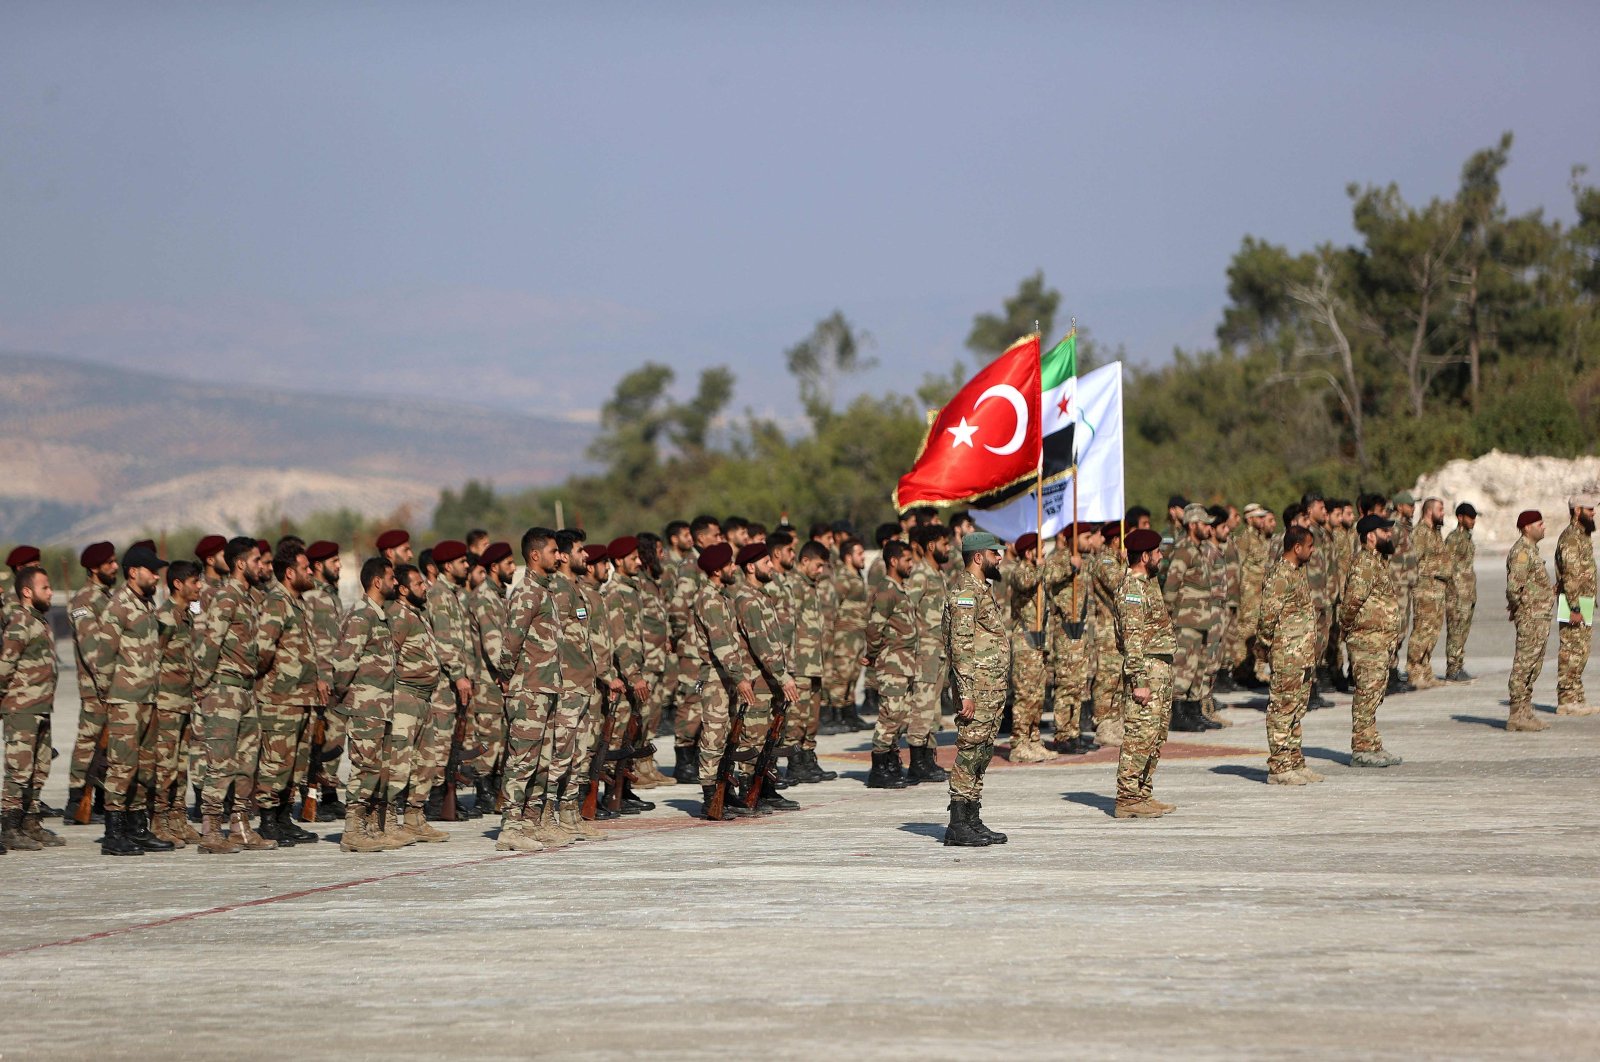 Syrian fighters from the 1st Corps of the Samarkand Brigade take part in a military parade in the opposition-held Afrin region of northern Syria, Nov. 23, 2022. (AFP Photo)